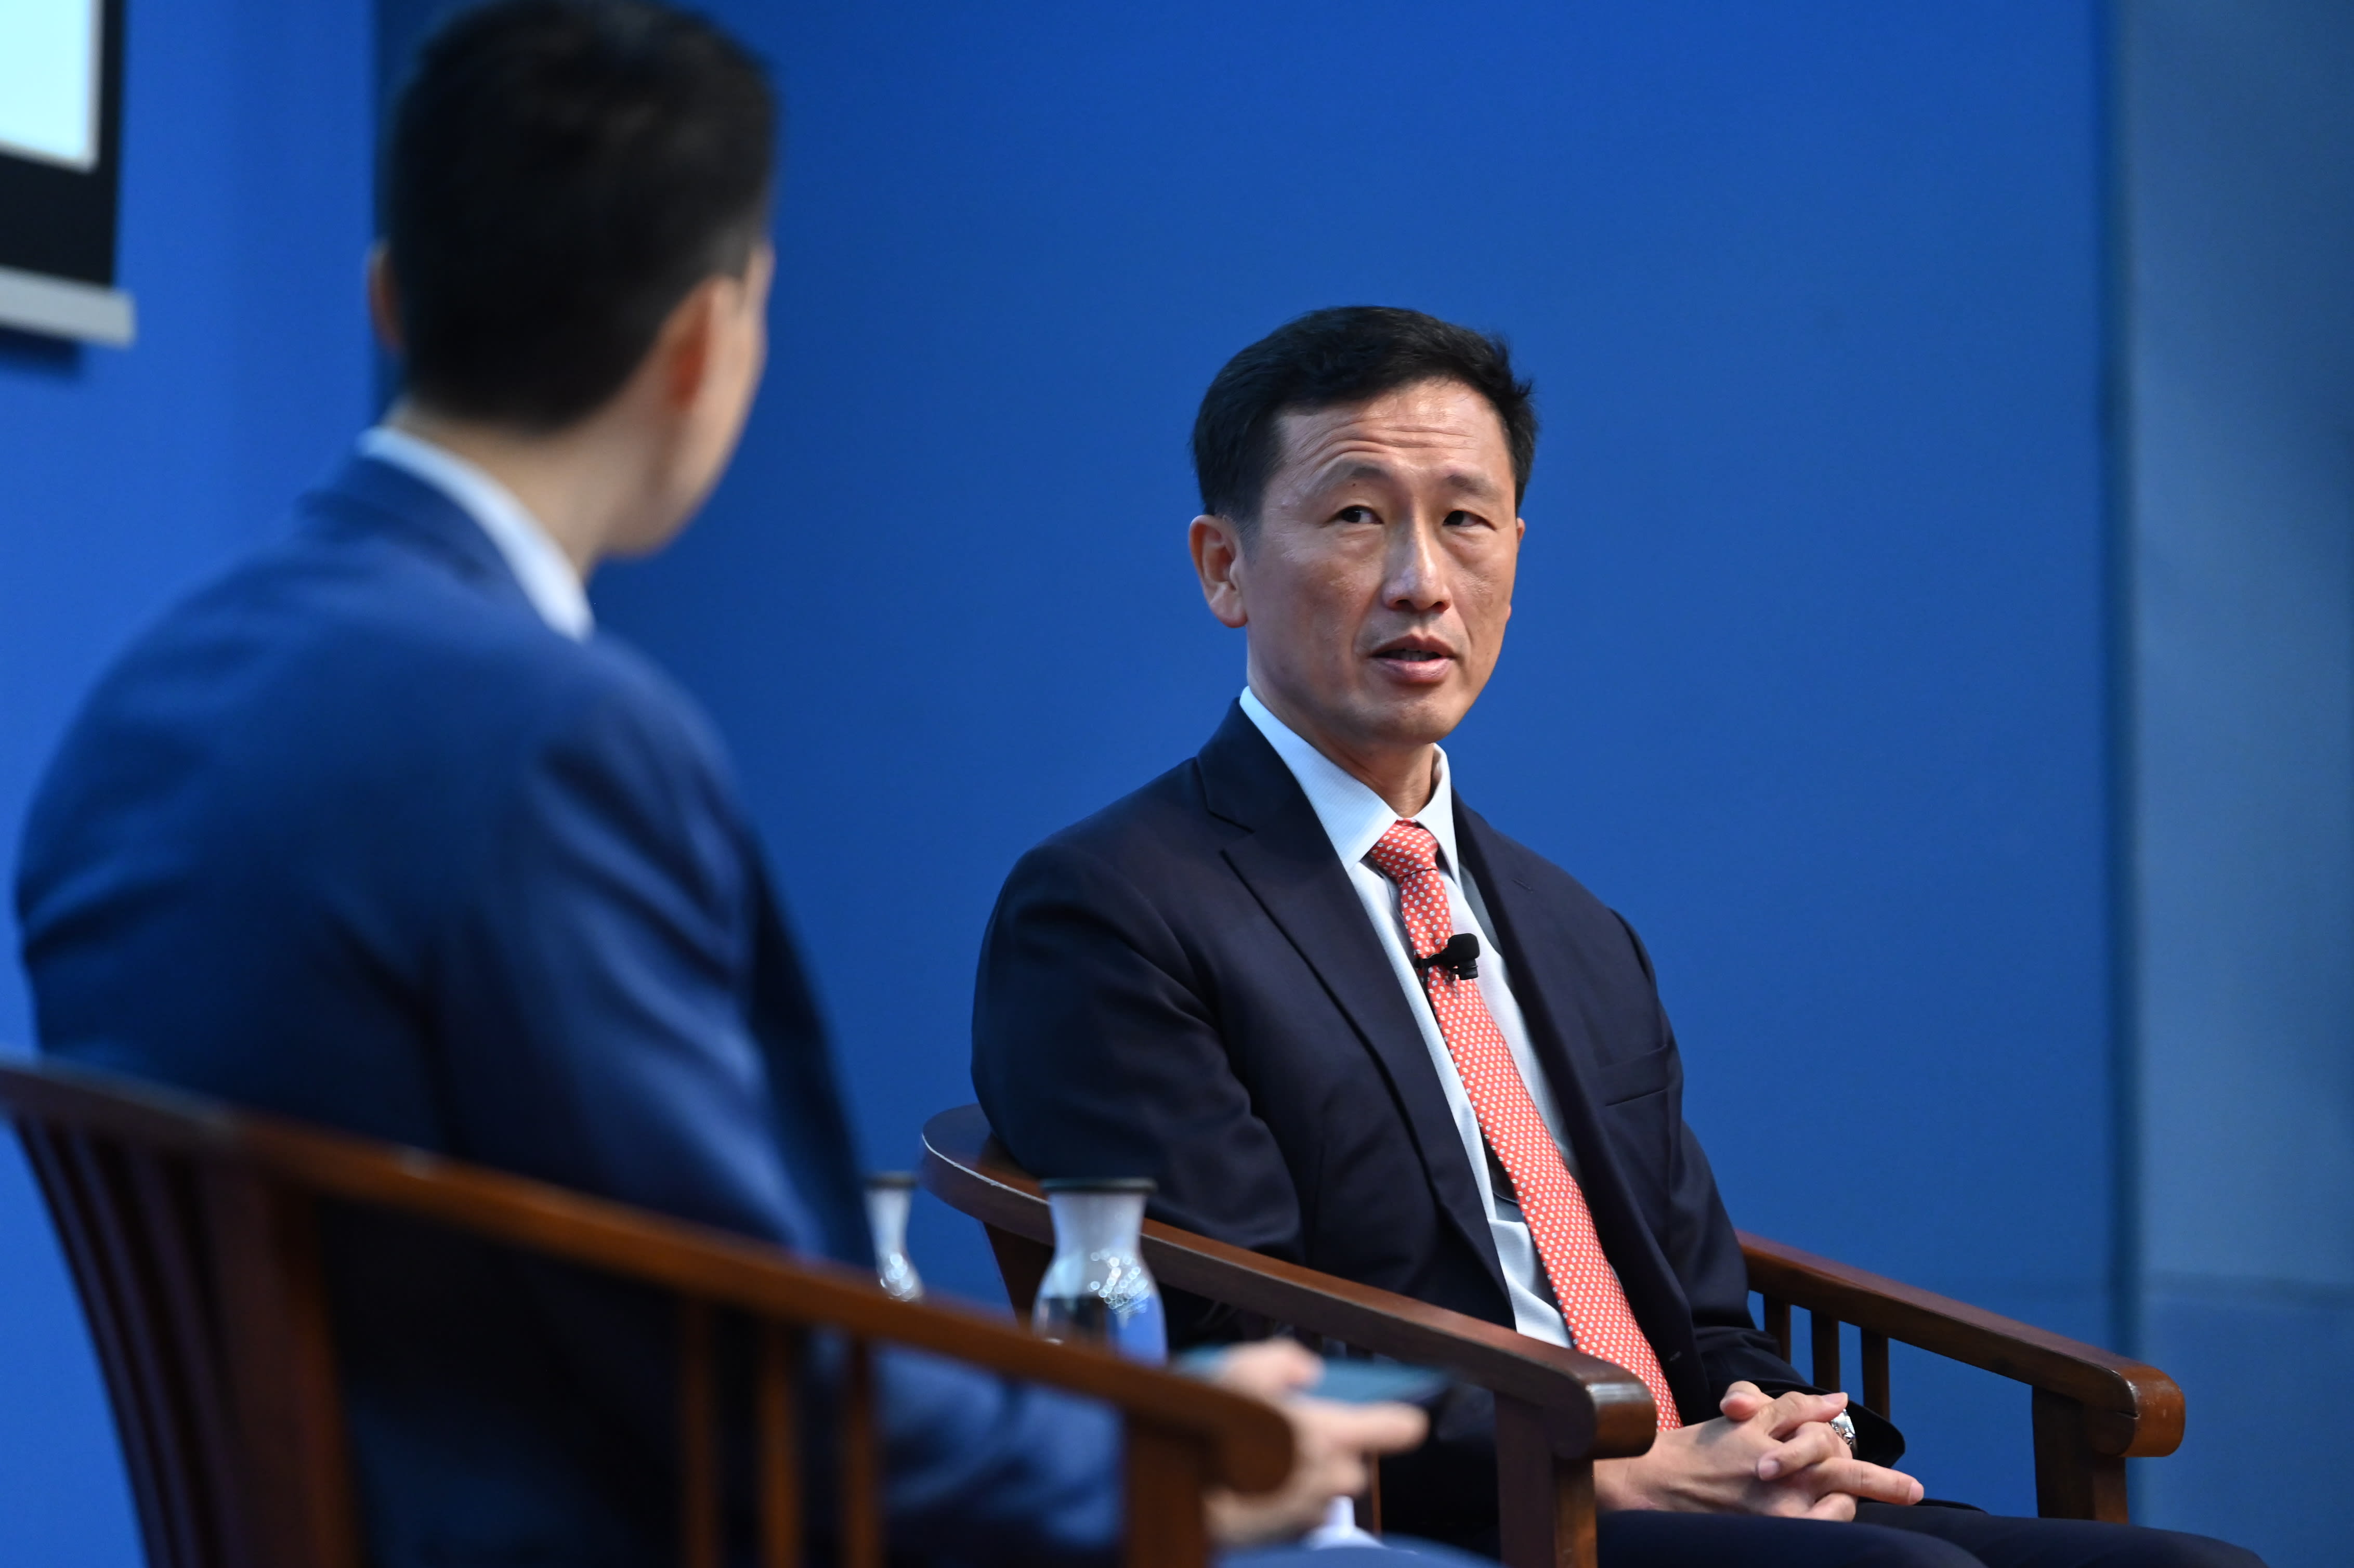 'Ownself check ownself' is a virtue, S'pore in trouble if Govt can't ensure public accountability: Ong Ye Kung